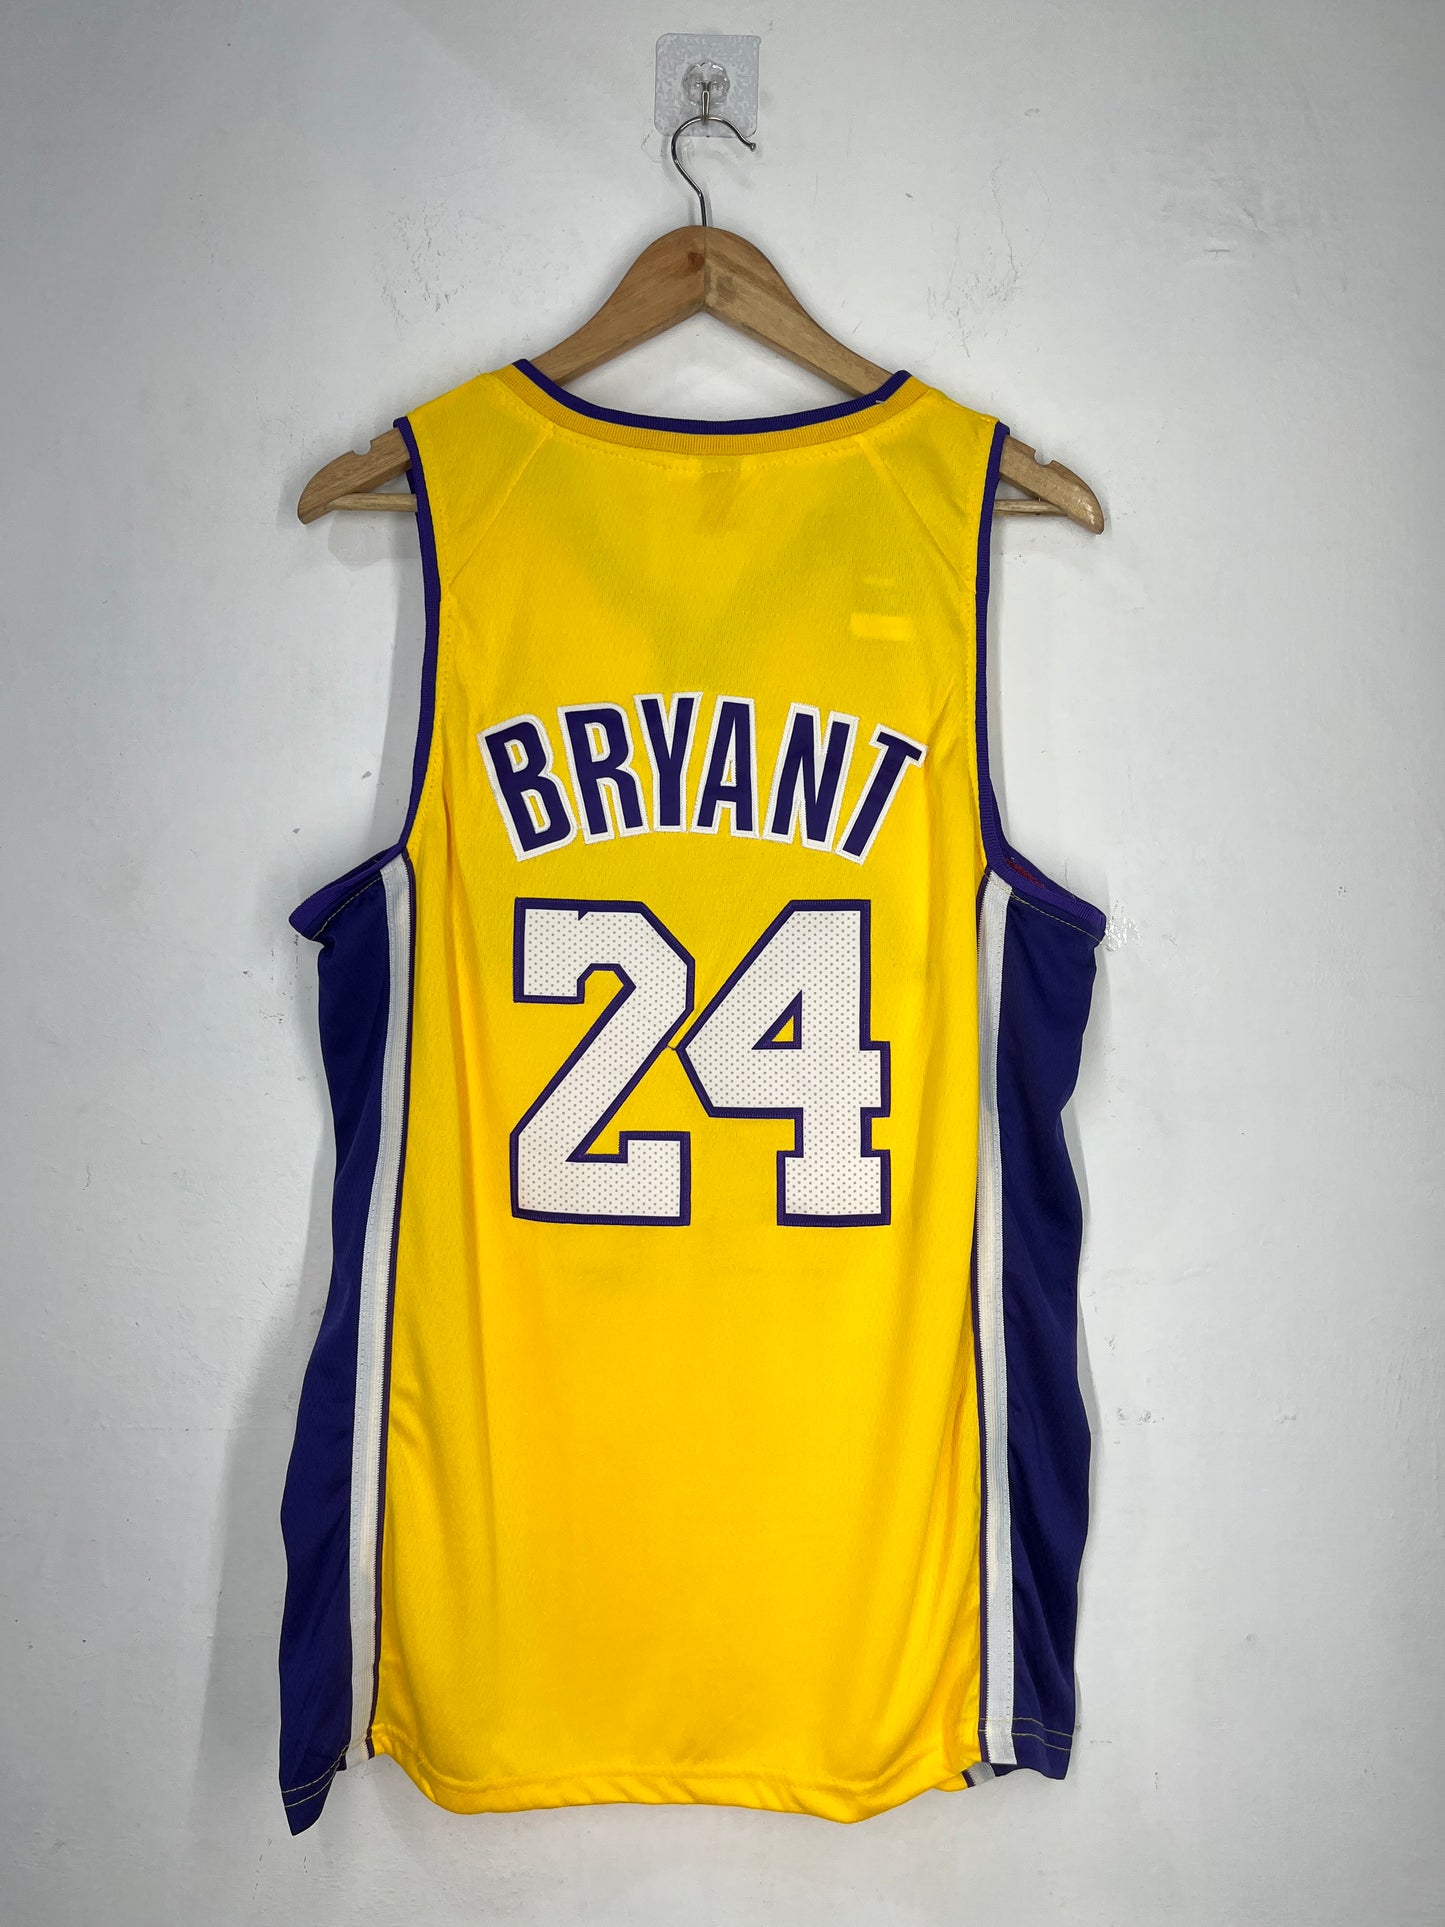 BRYANT 24 Yellow Los Angeles Lakers NBA Jersey Champions Edition